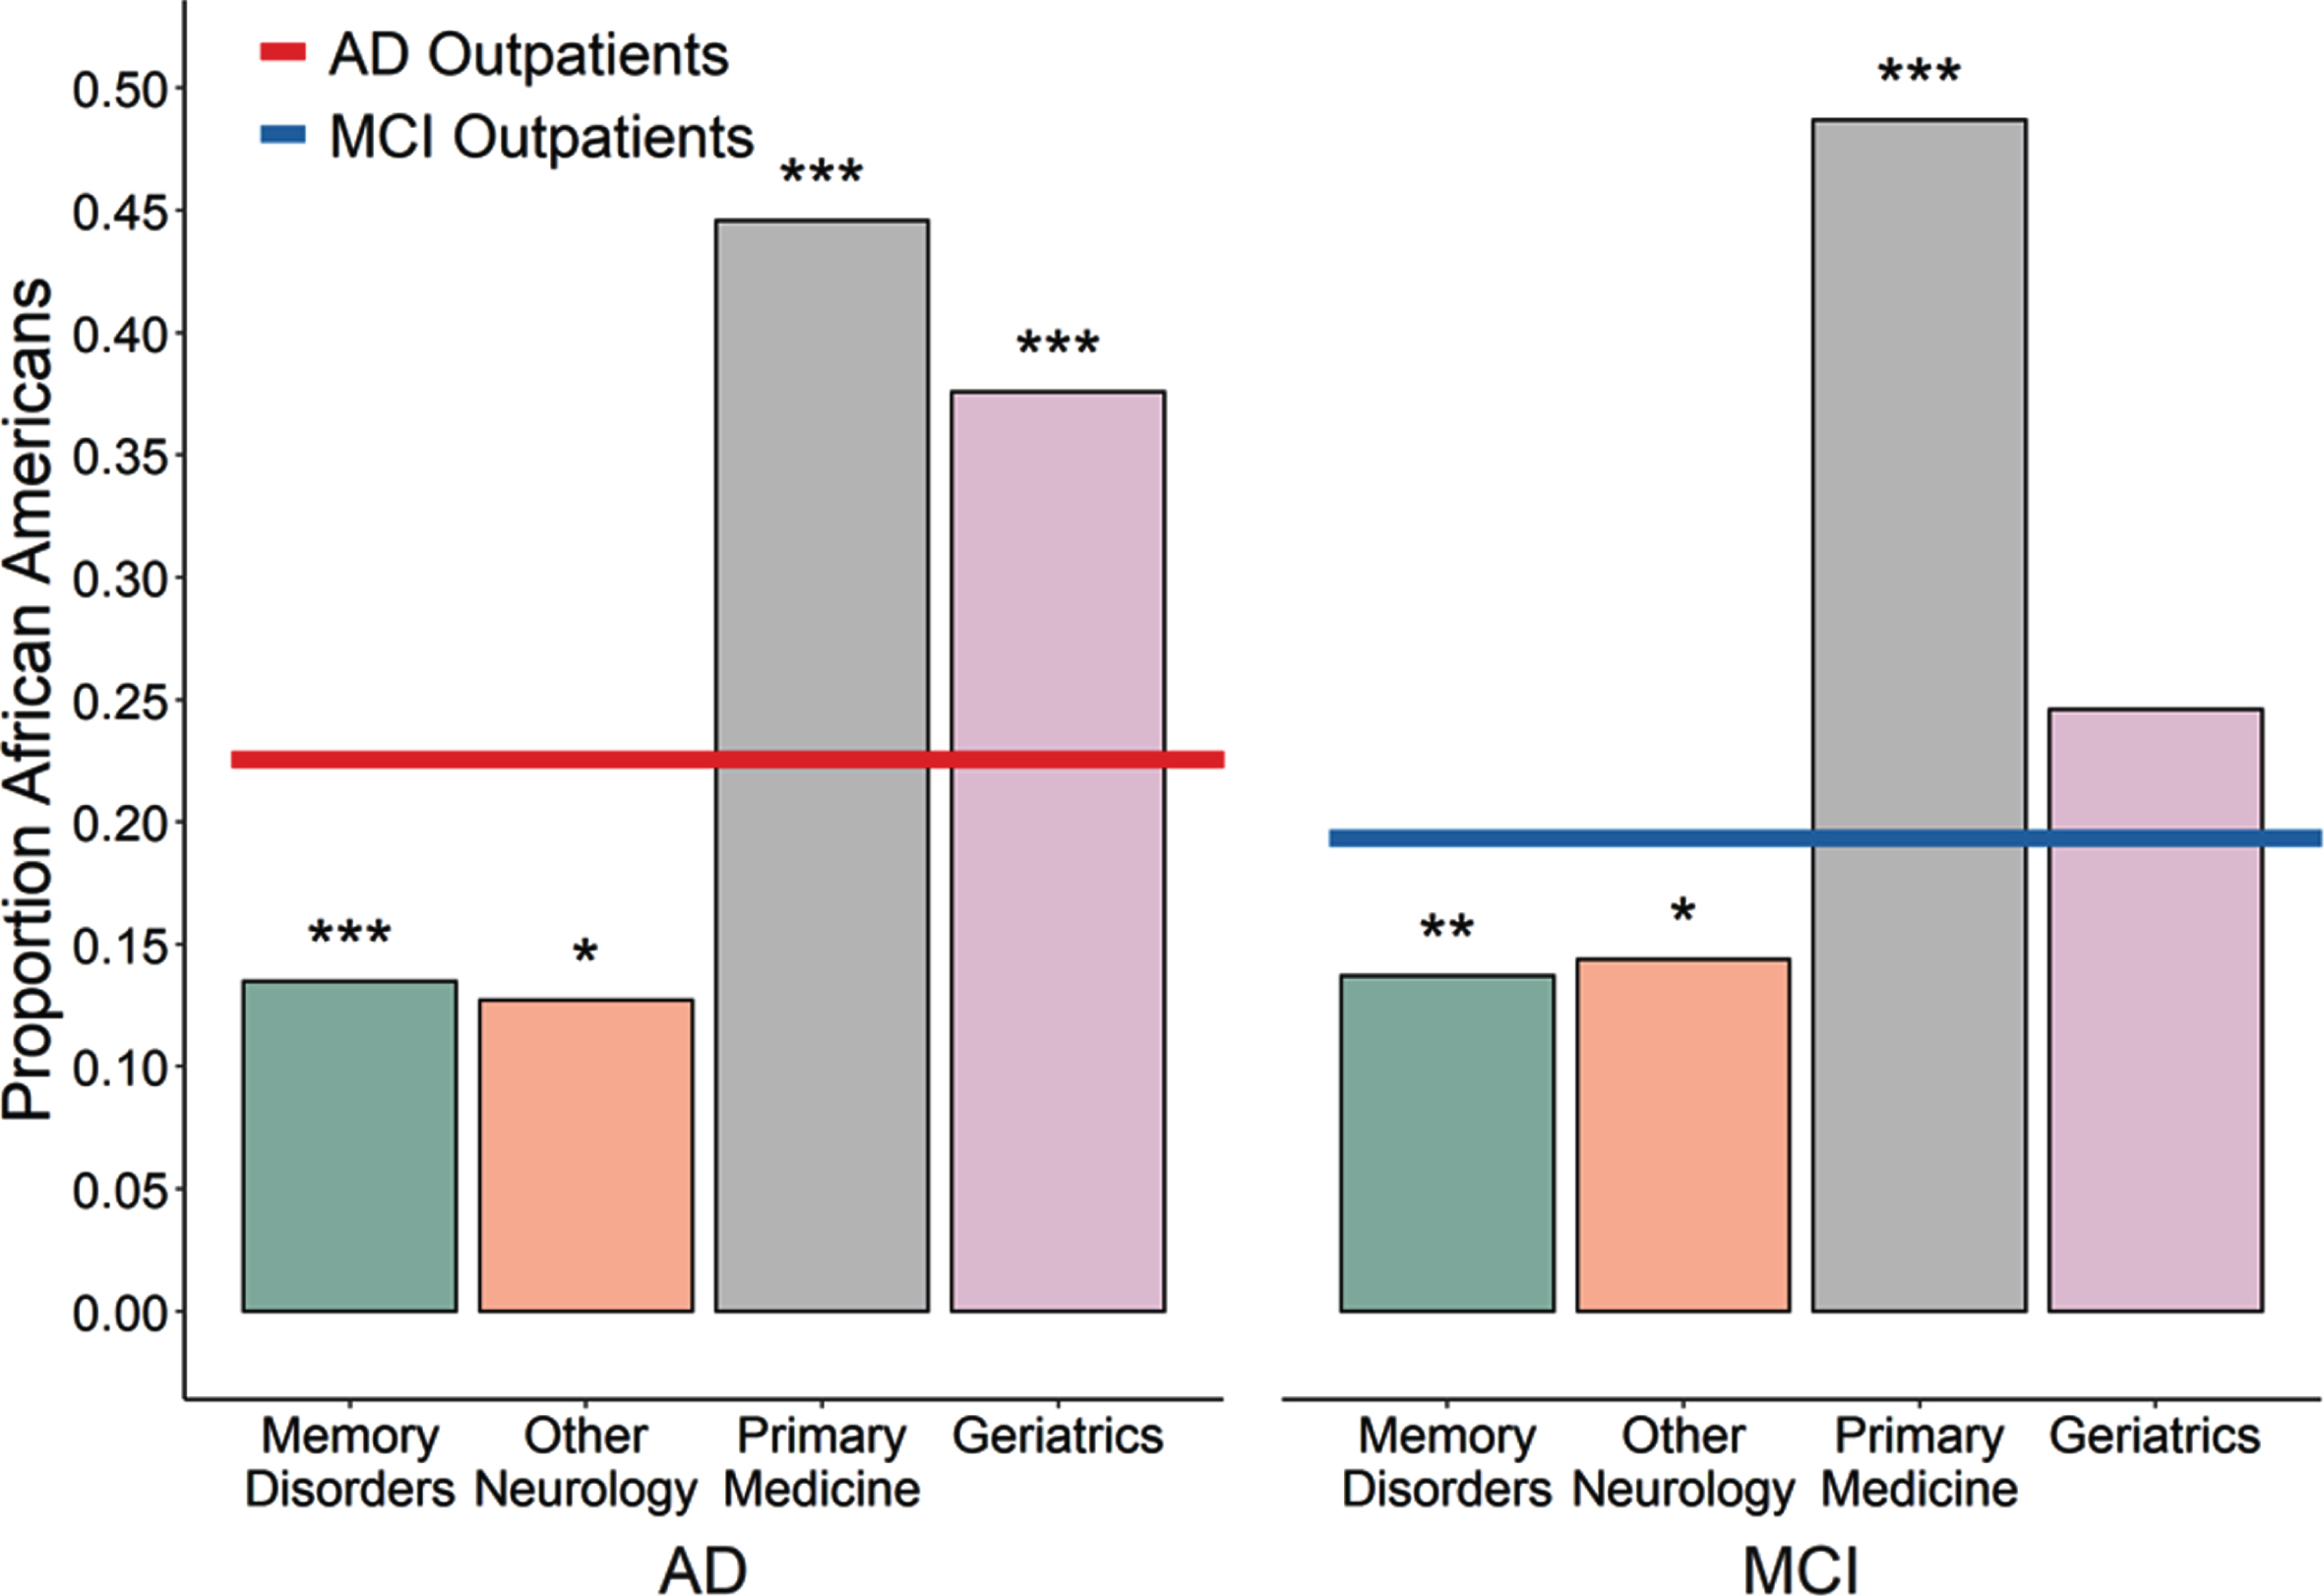 Proportion of unique outpatients seen in various settings with a primary diagnosis of AD or MCI who were African American. Left, The African American proportion of outpatients seen for AD within the Memory Disorders specialty clinic or in other Neurology clinics was less than the proportion seen for AD outpatients across the entire medical system (red line, 22.5%; p < 0.0001 and p = 0.0081 respectively) while the proportion seen within the Primary Medicine and Geriatrics clinics was greater than expected (both p < 0.0001). Right, A similar pattern held for outpatients seen for MCI, with African Americans also underrepresented in the Memory Disorders and other Neurology clinics (p = 0.0007 and p = 0.0036 respectively) and overrepresented in the Primary Medicine clinic (p < 0.0001) with a trend towards overrepresentation in the Geriatrics clinic (p = 0.029), relative to enterprise-wide average (blue line, 19.3%).